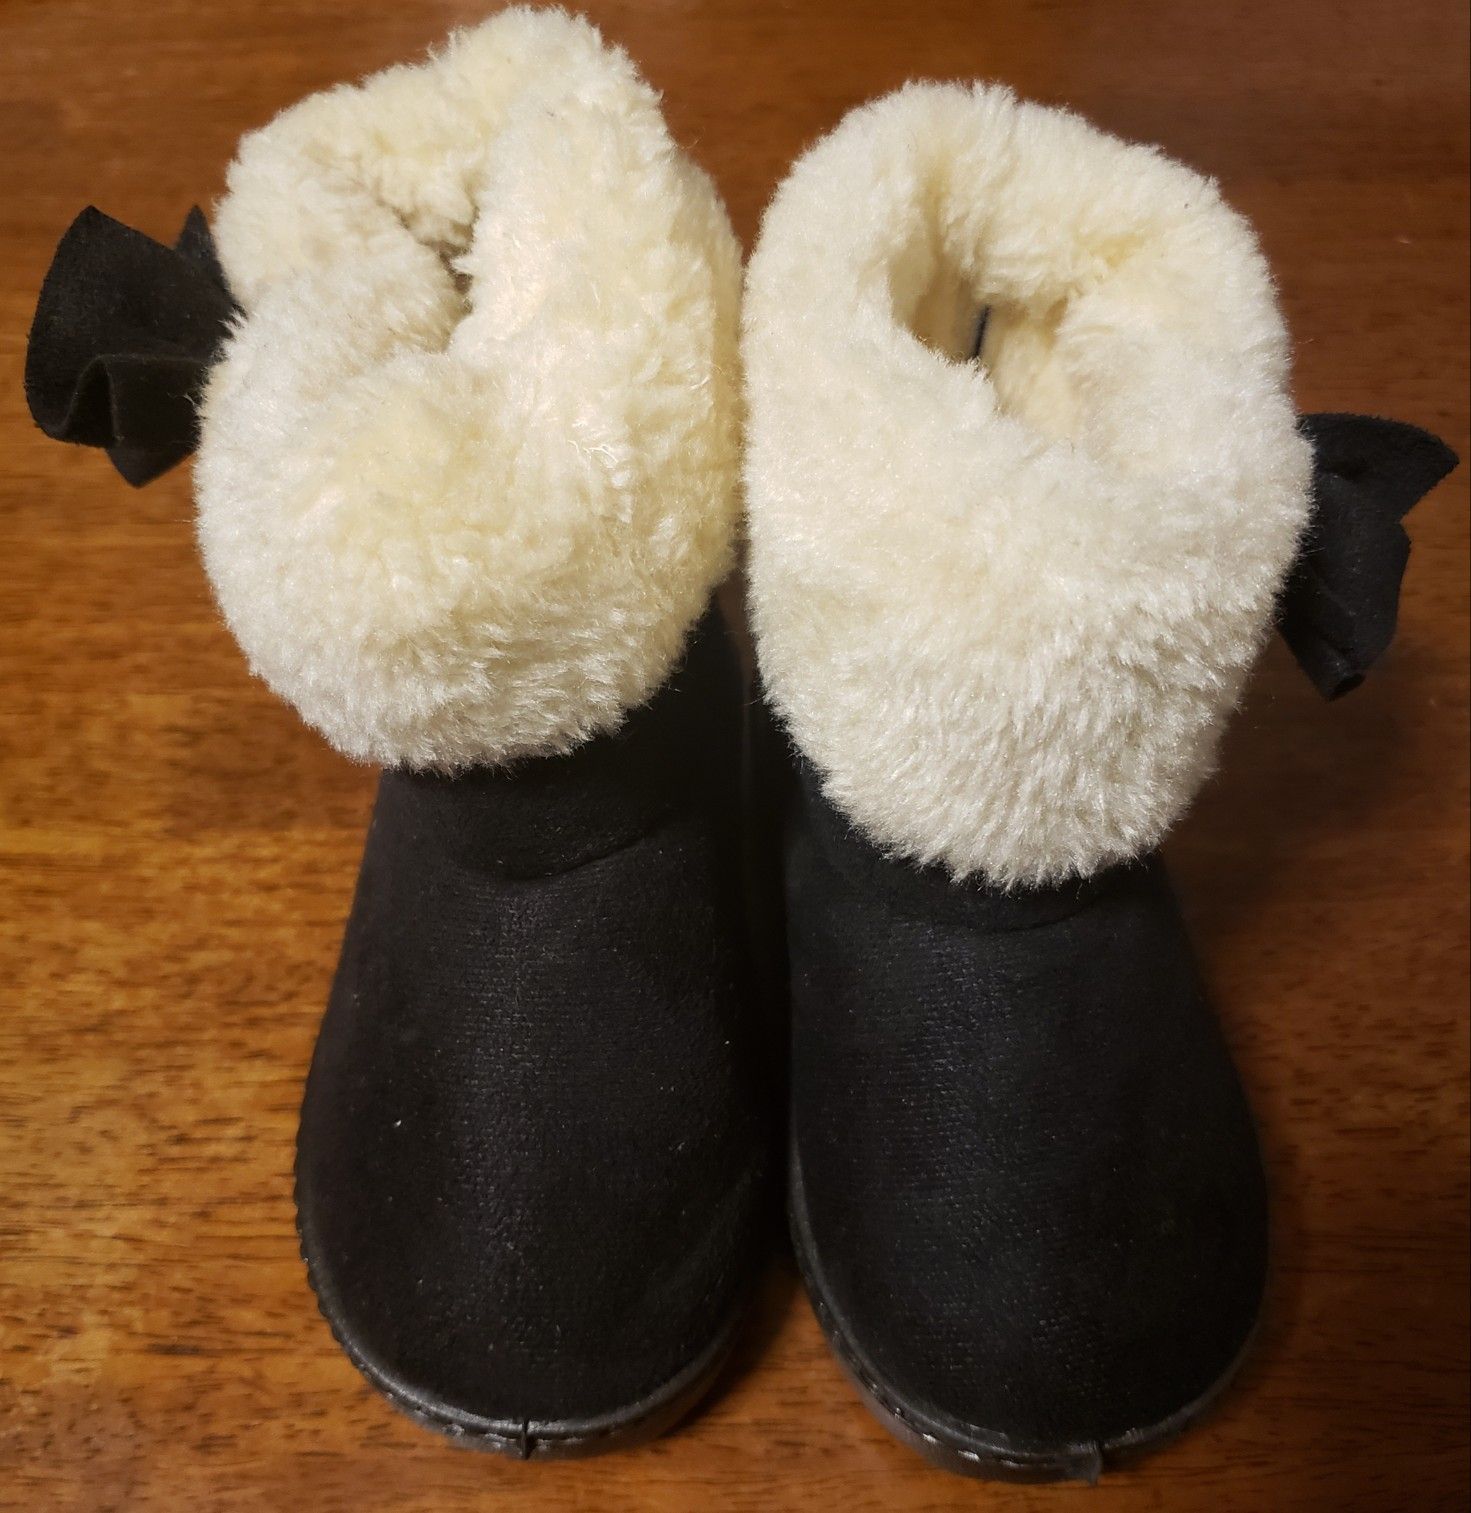 Baby Girls Boots (size 24)... $20